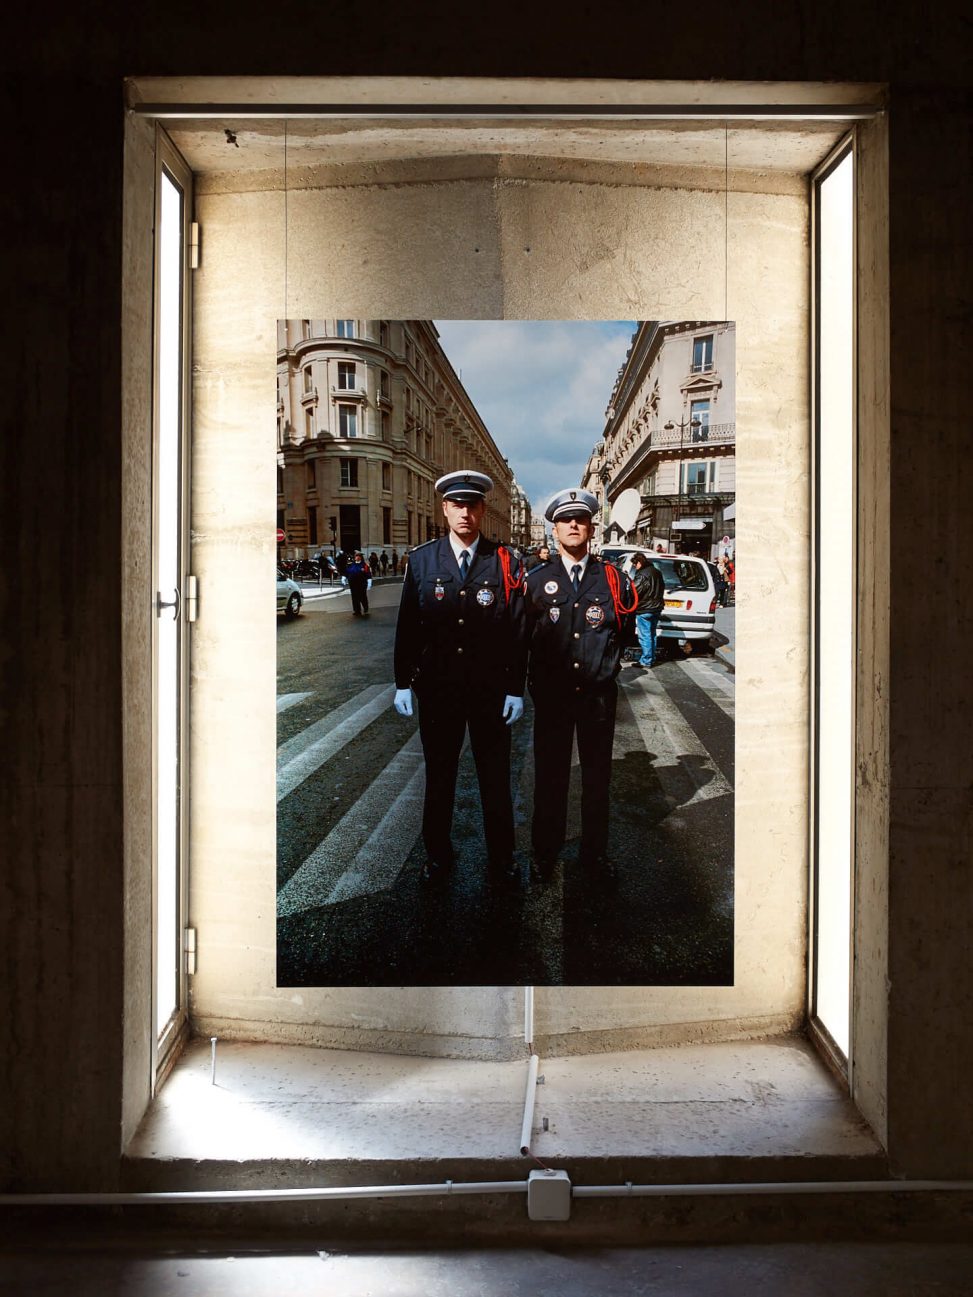 Arles 2019 - Photography exhibition by Mohamed Bourouissa